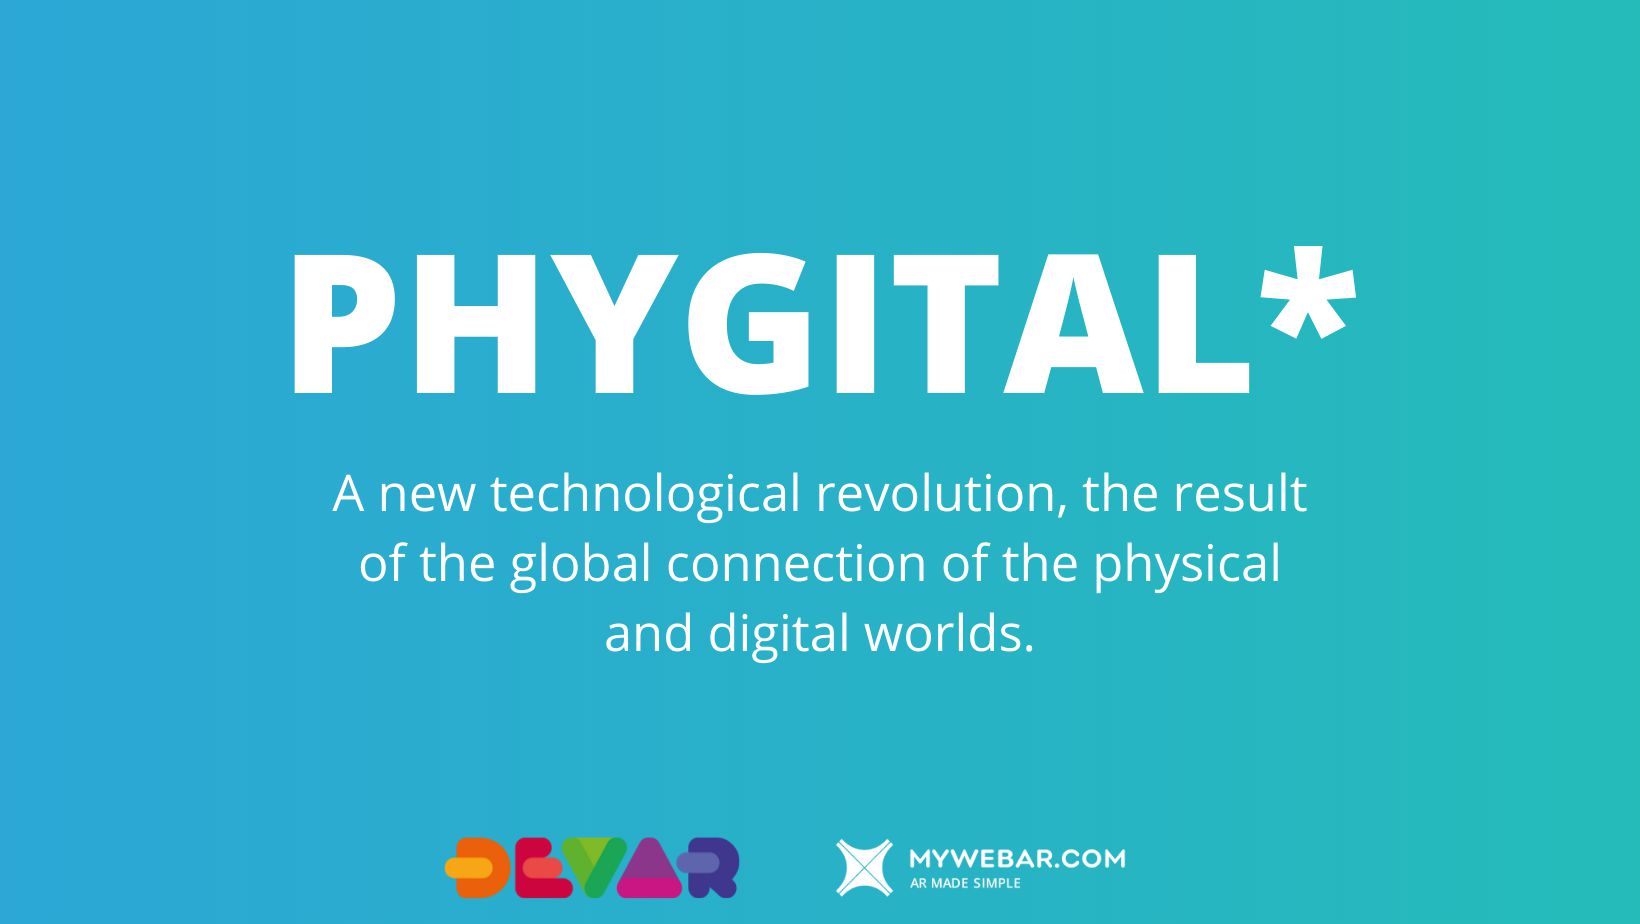 How Metaverse Will Lead to Phygital Revolution